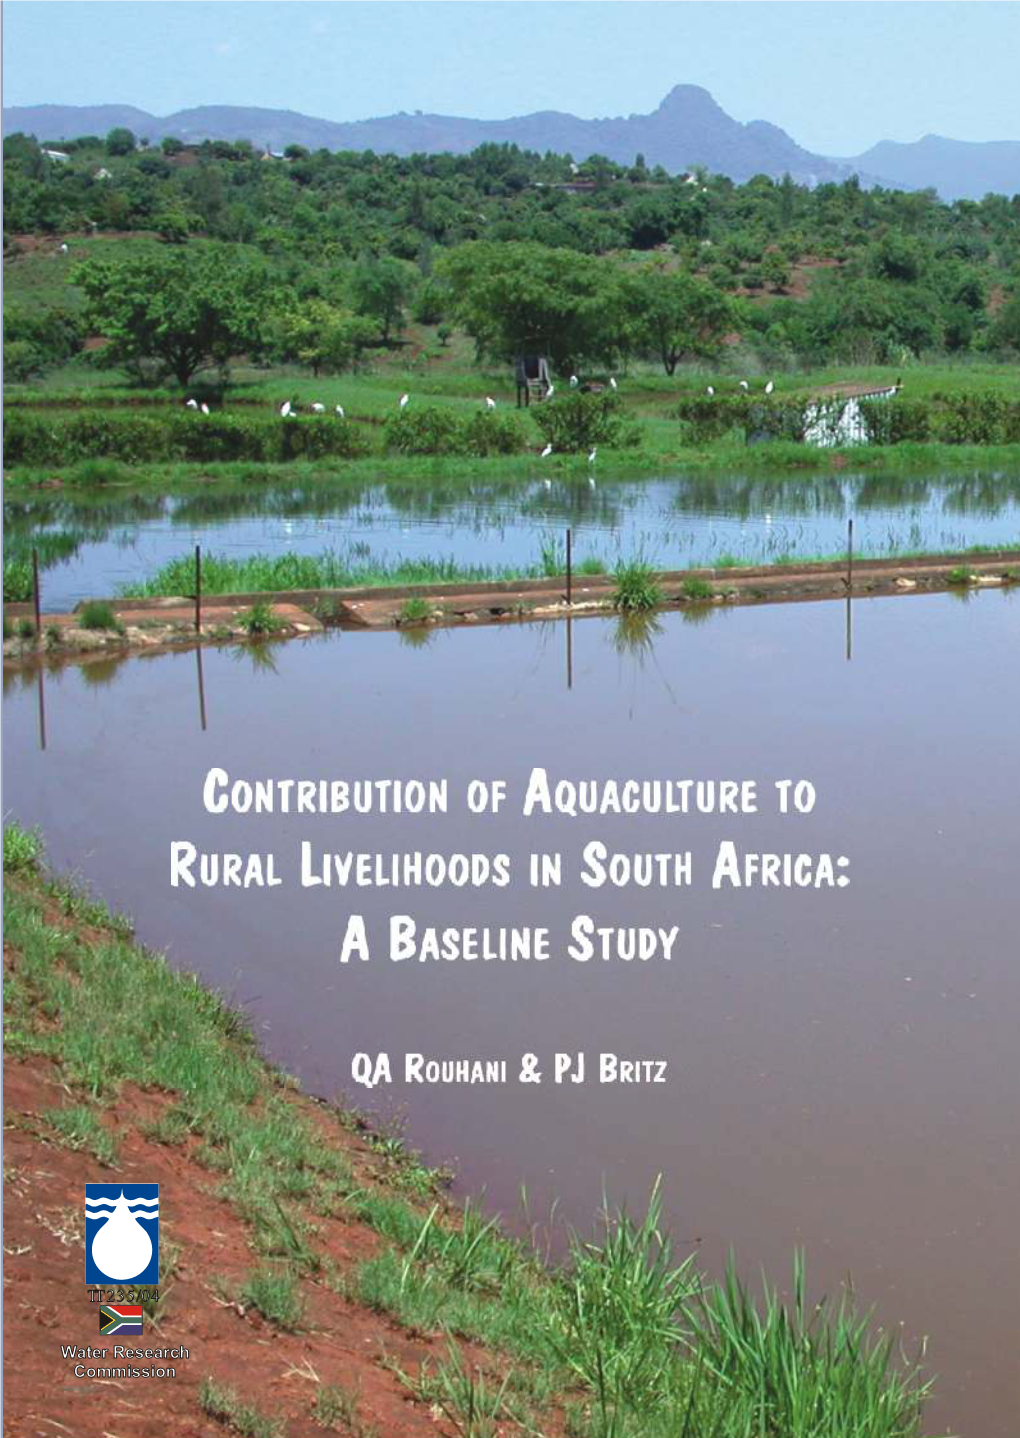 Contribution of Aquaculture to Rural Livelihoods in South Africa: a Baseline Study by QA Rouhani & PJ Britz